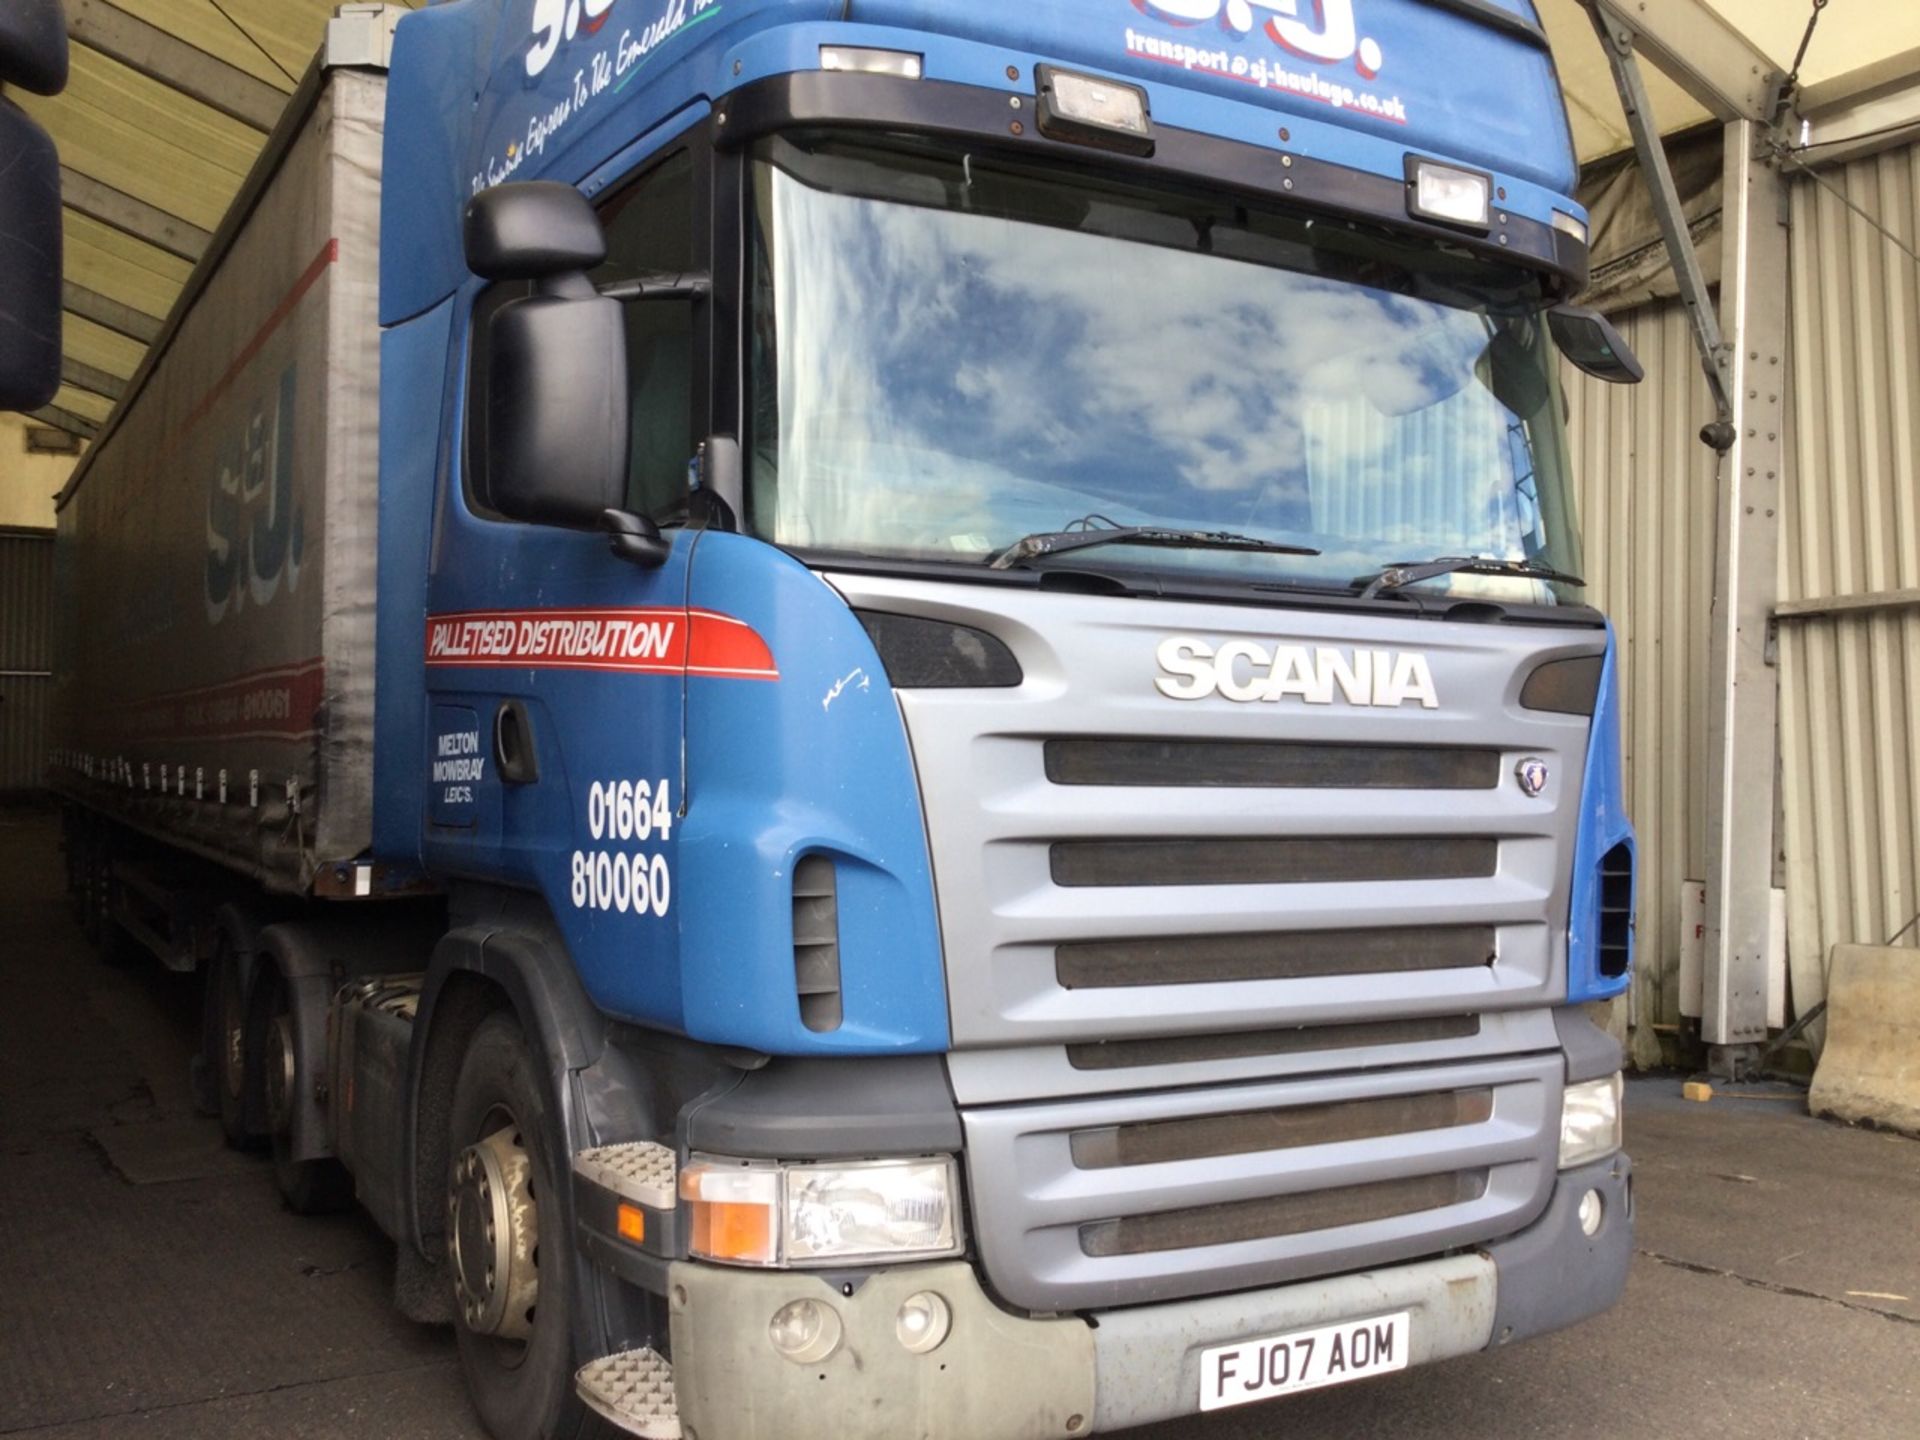 SCANIA R-SRS L-CLASS 6x2 Tractor Unit With Mid Lift Axle, Sleeper Cab 1206599kms Mot No Details, R - Image 2 of 3